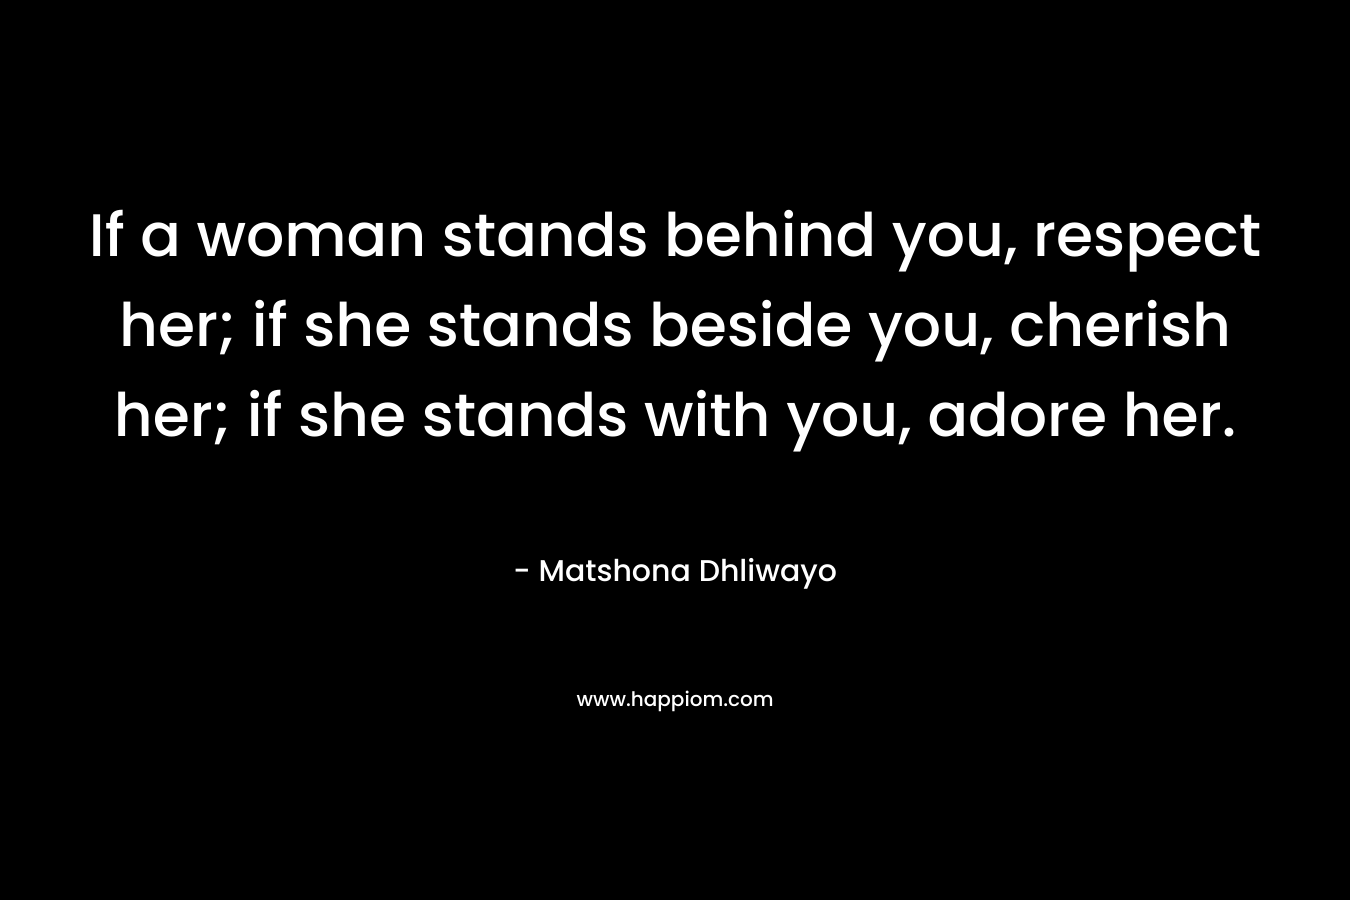 If a woman stands behind you, respect her; if she stands beside you, cherish her; if she stands with you, adore her.